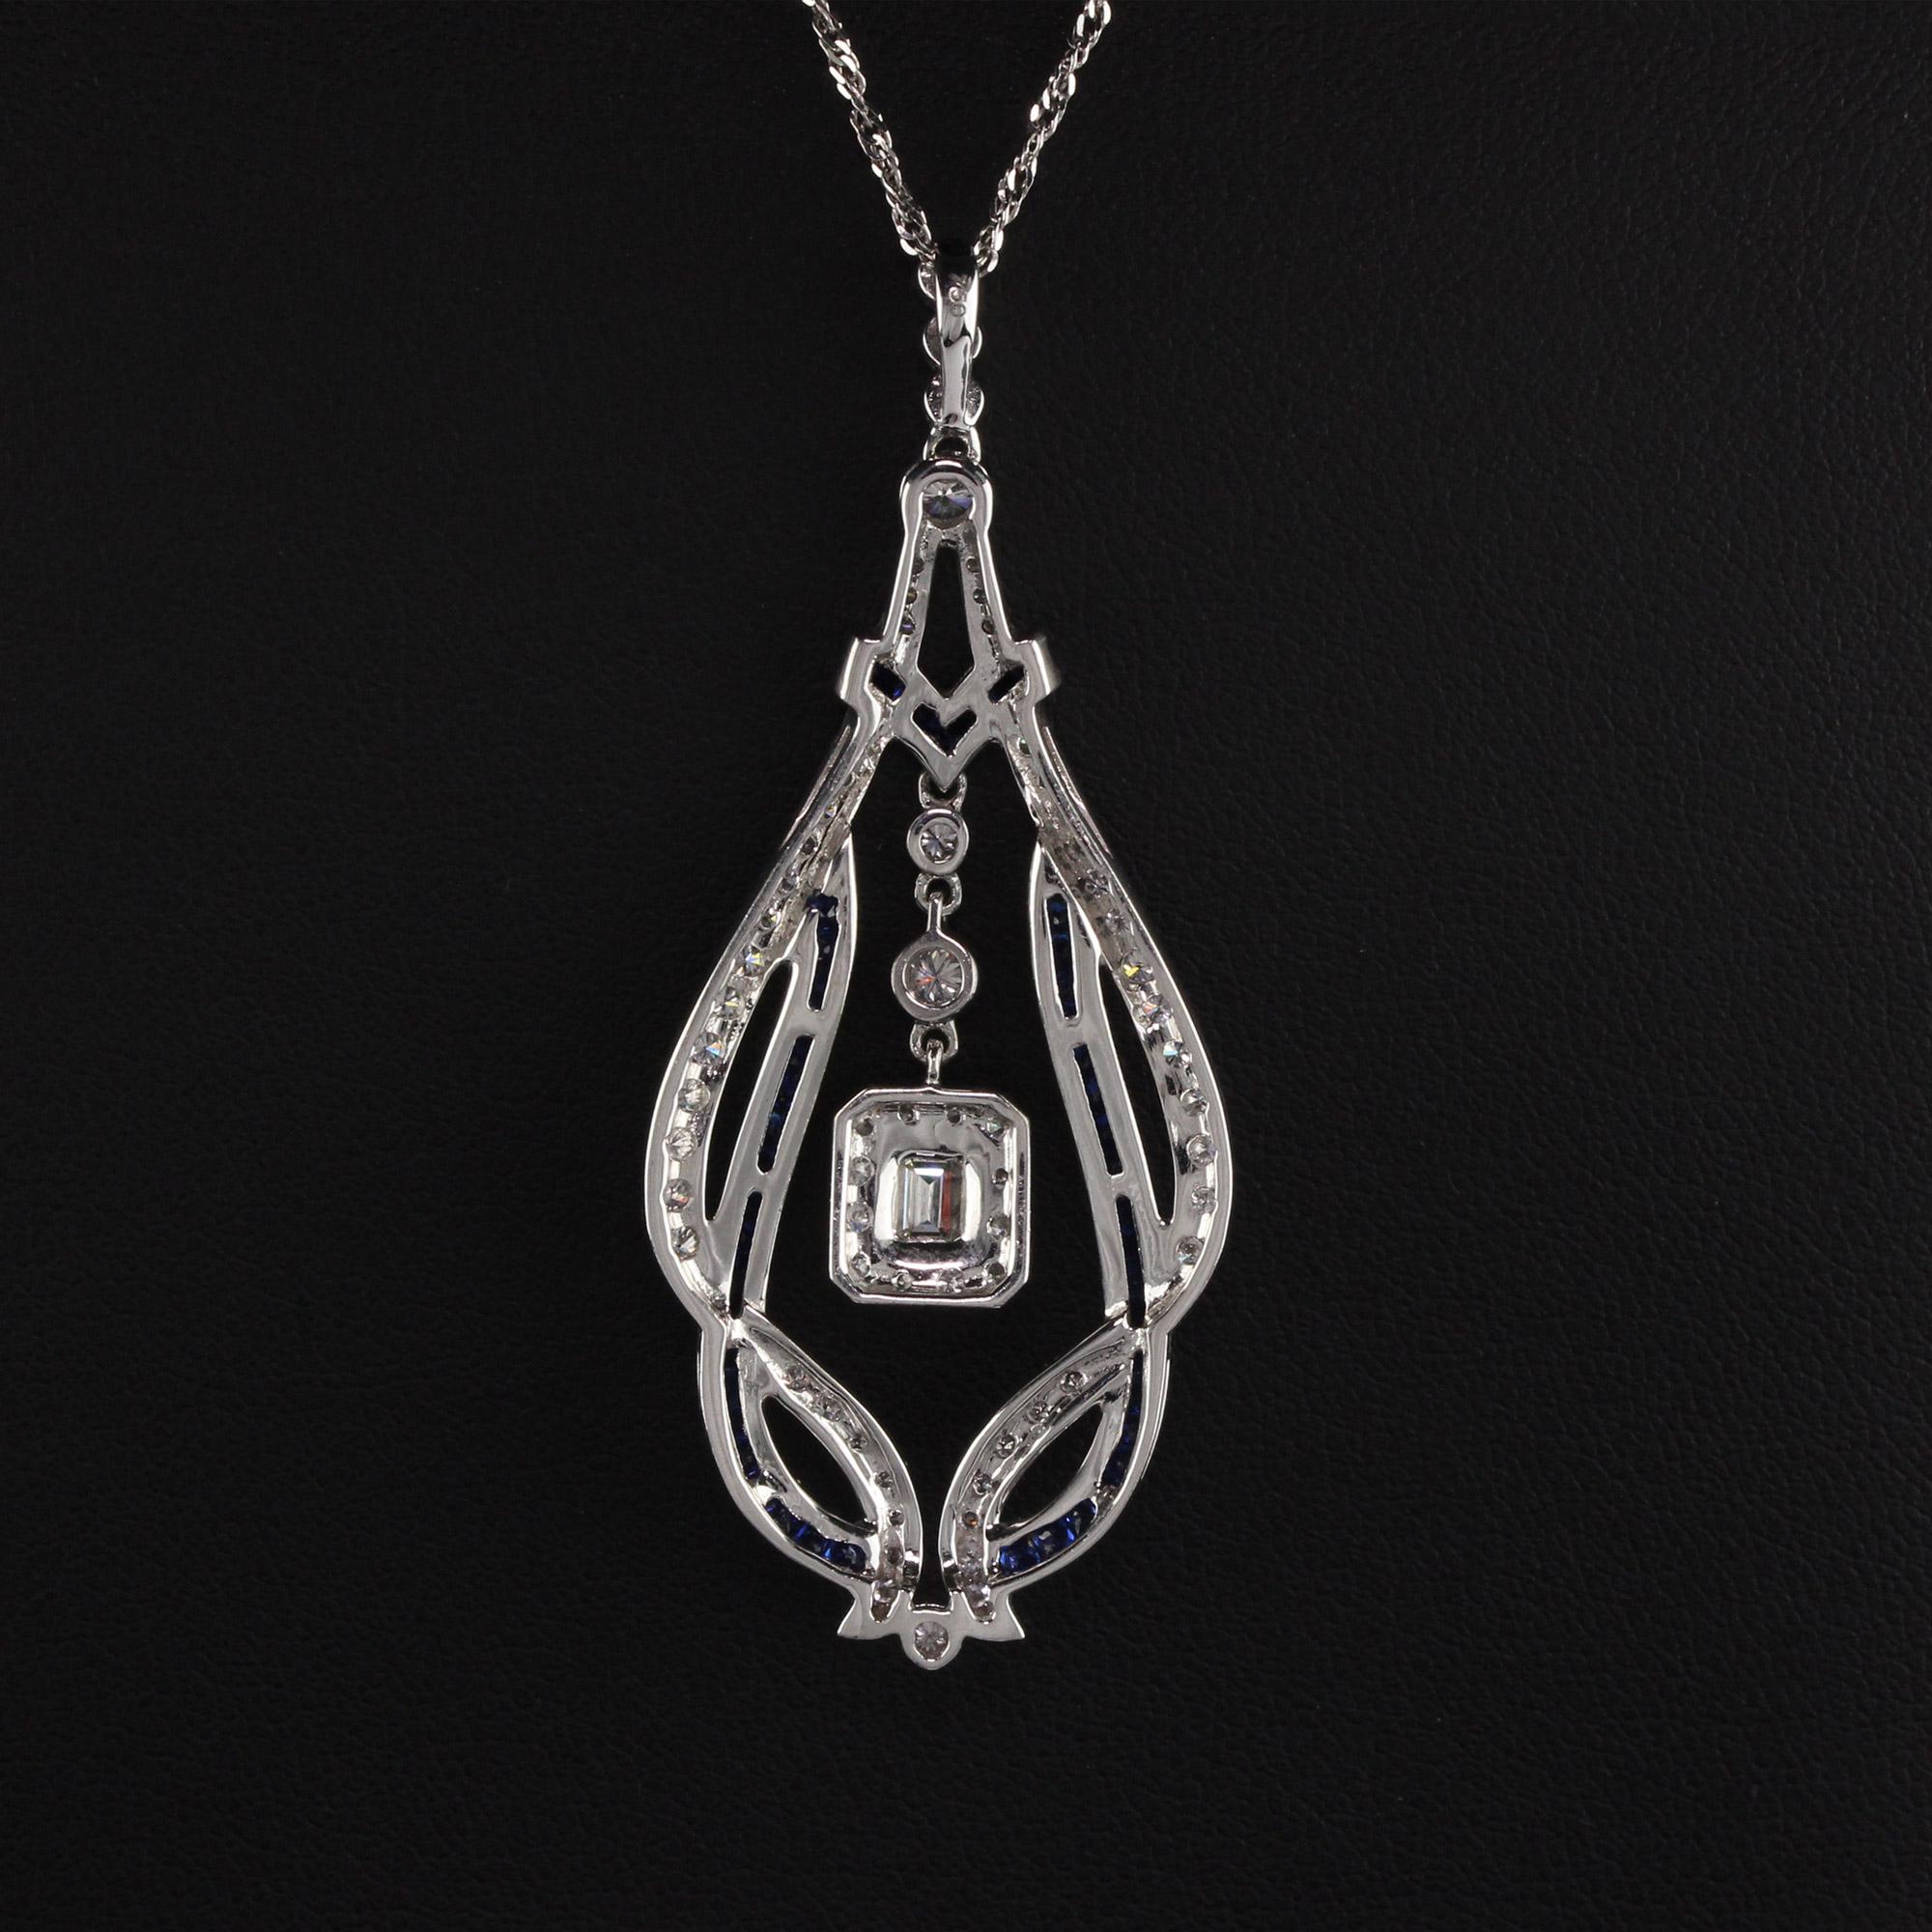 Vintage Estate 18 Karat White Gold Diamond and Sapphire Necklace In Excellent Condition For Sale In Great Neck, NY